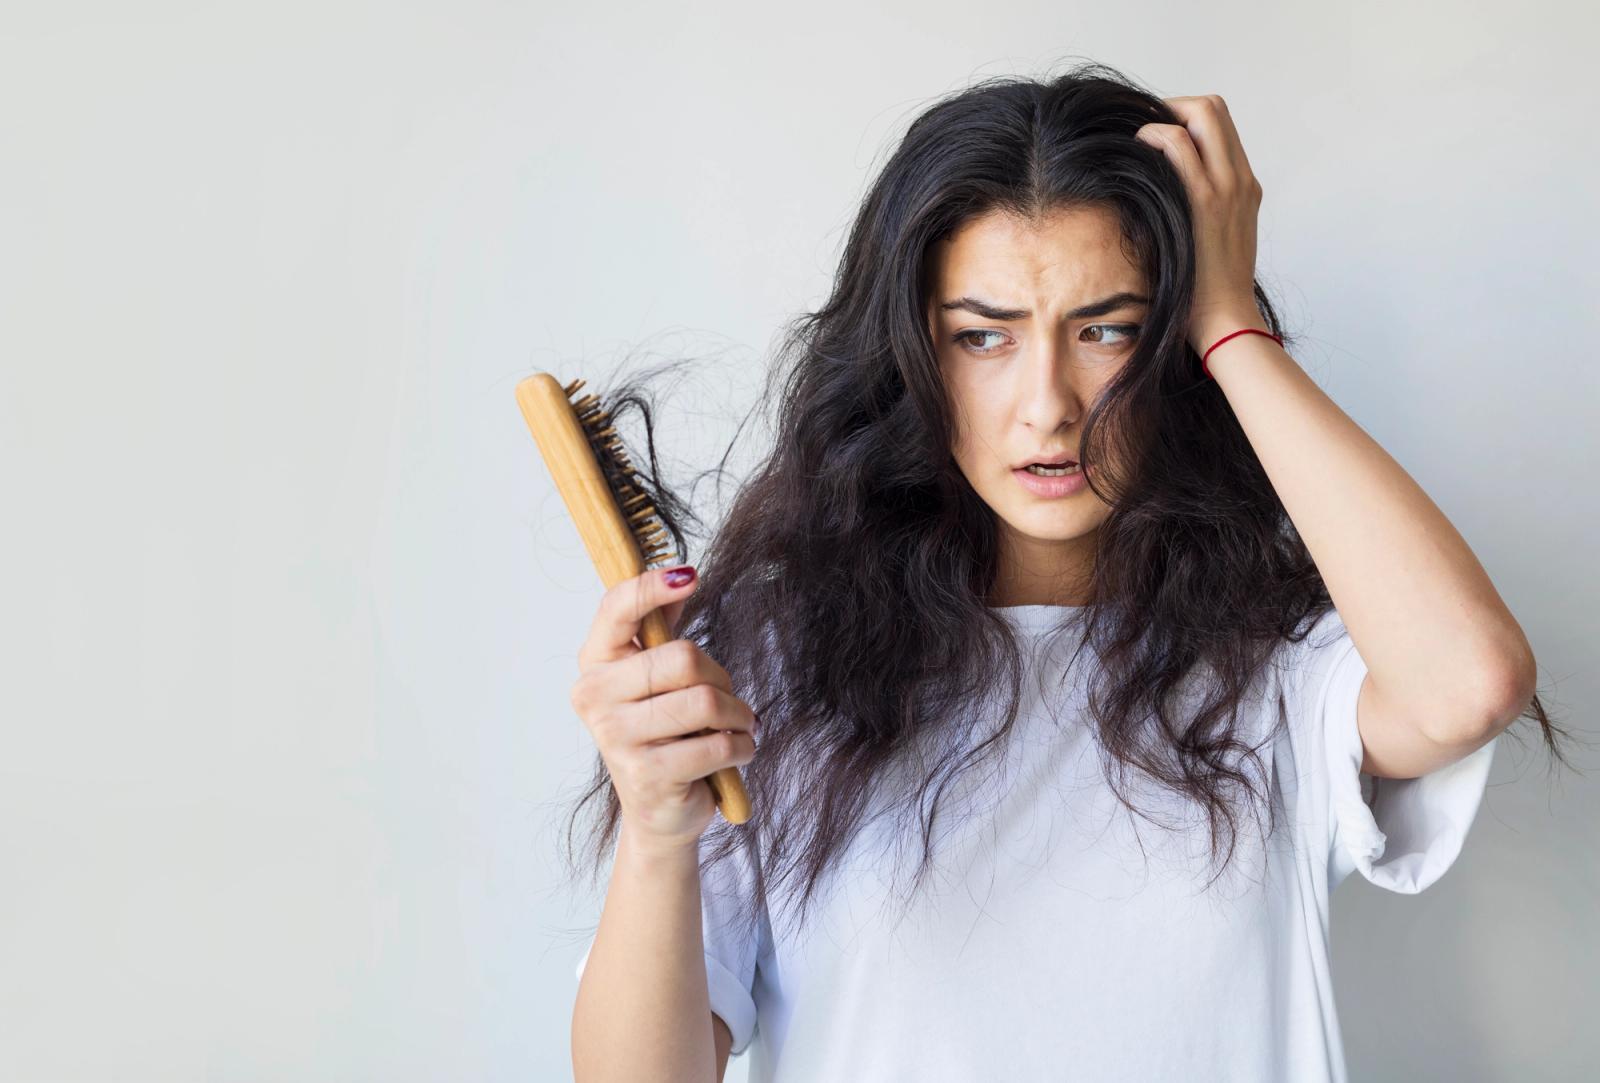 Woman with black wavy hair looking shocked as brushing hair a chunk of her hair comes off.